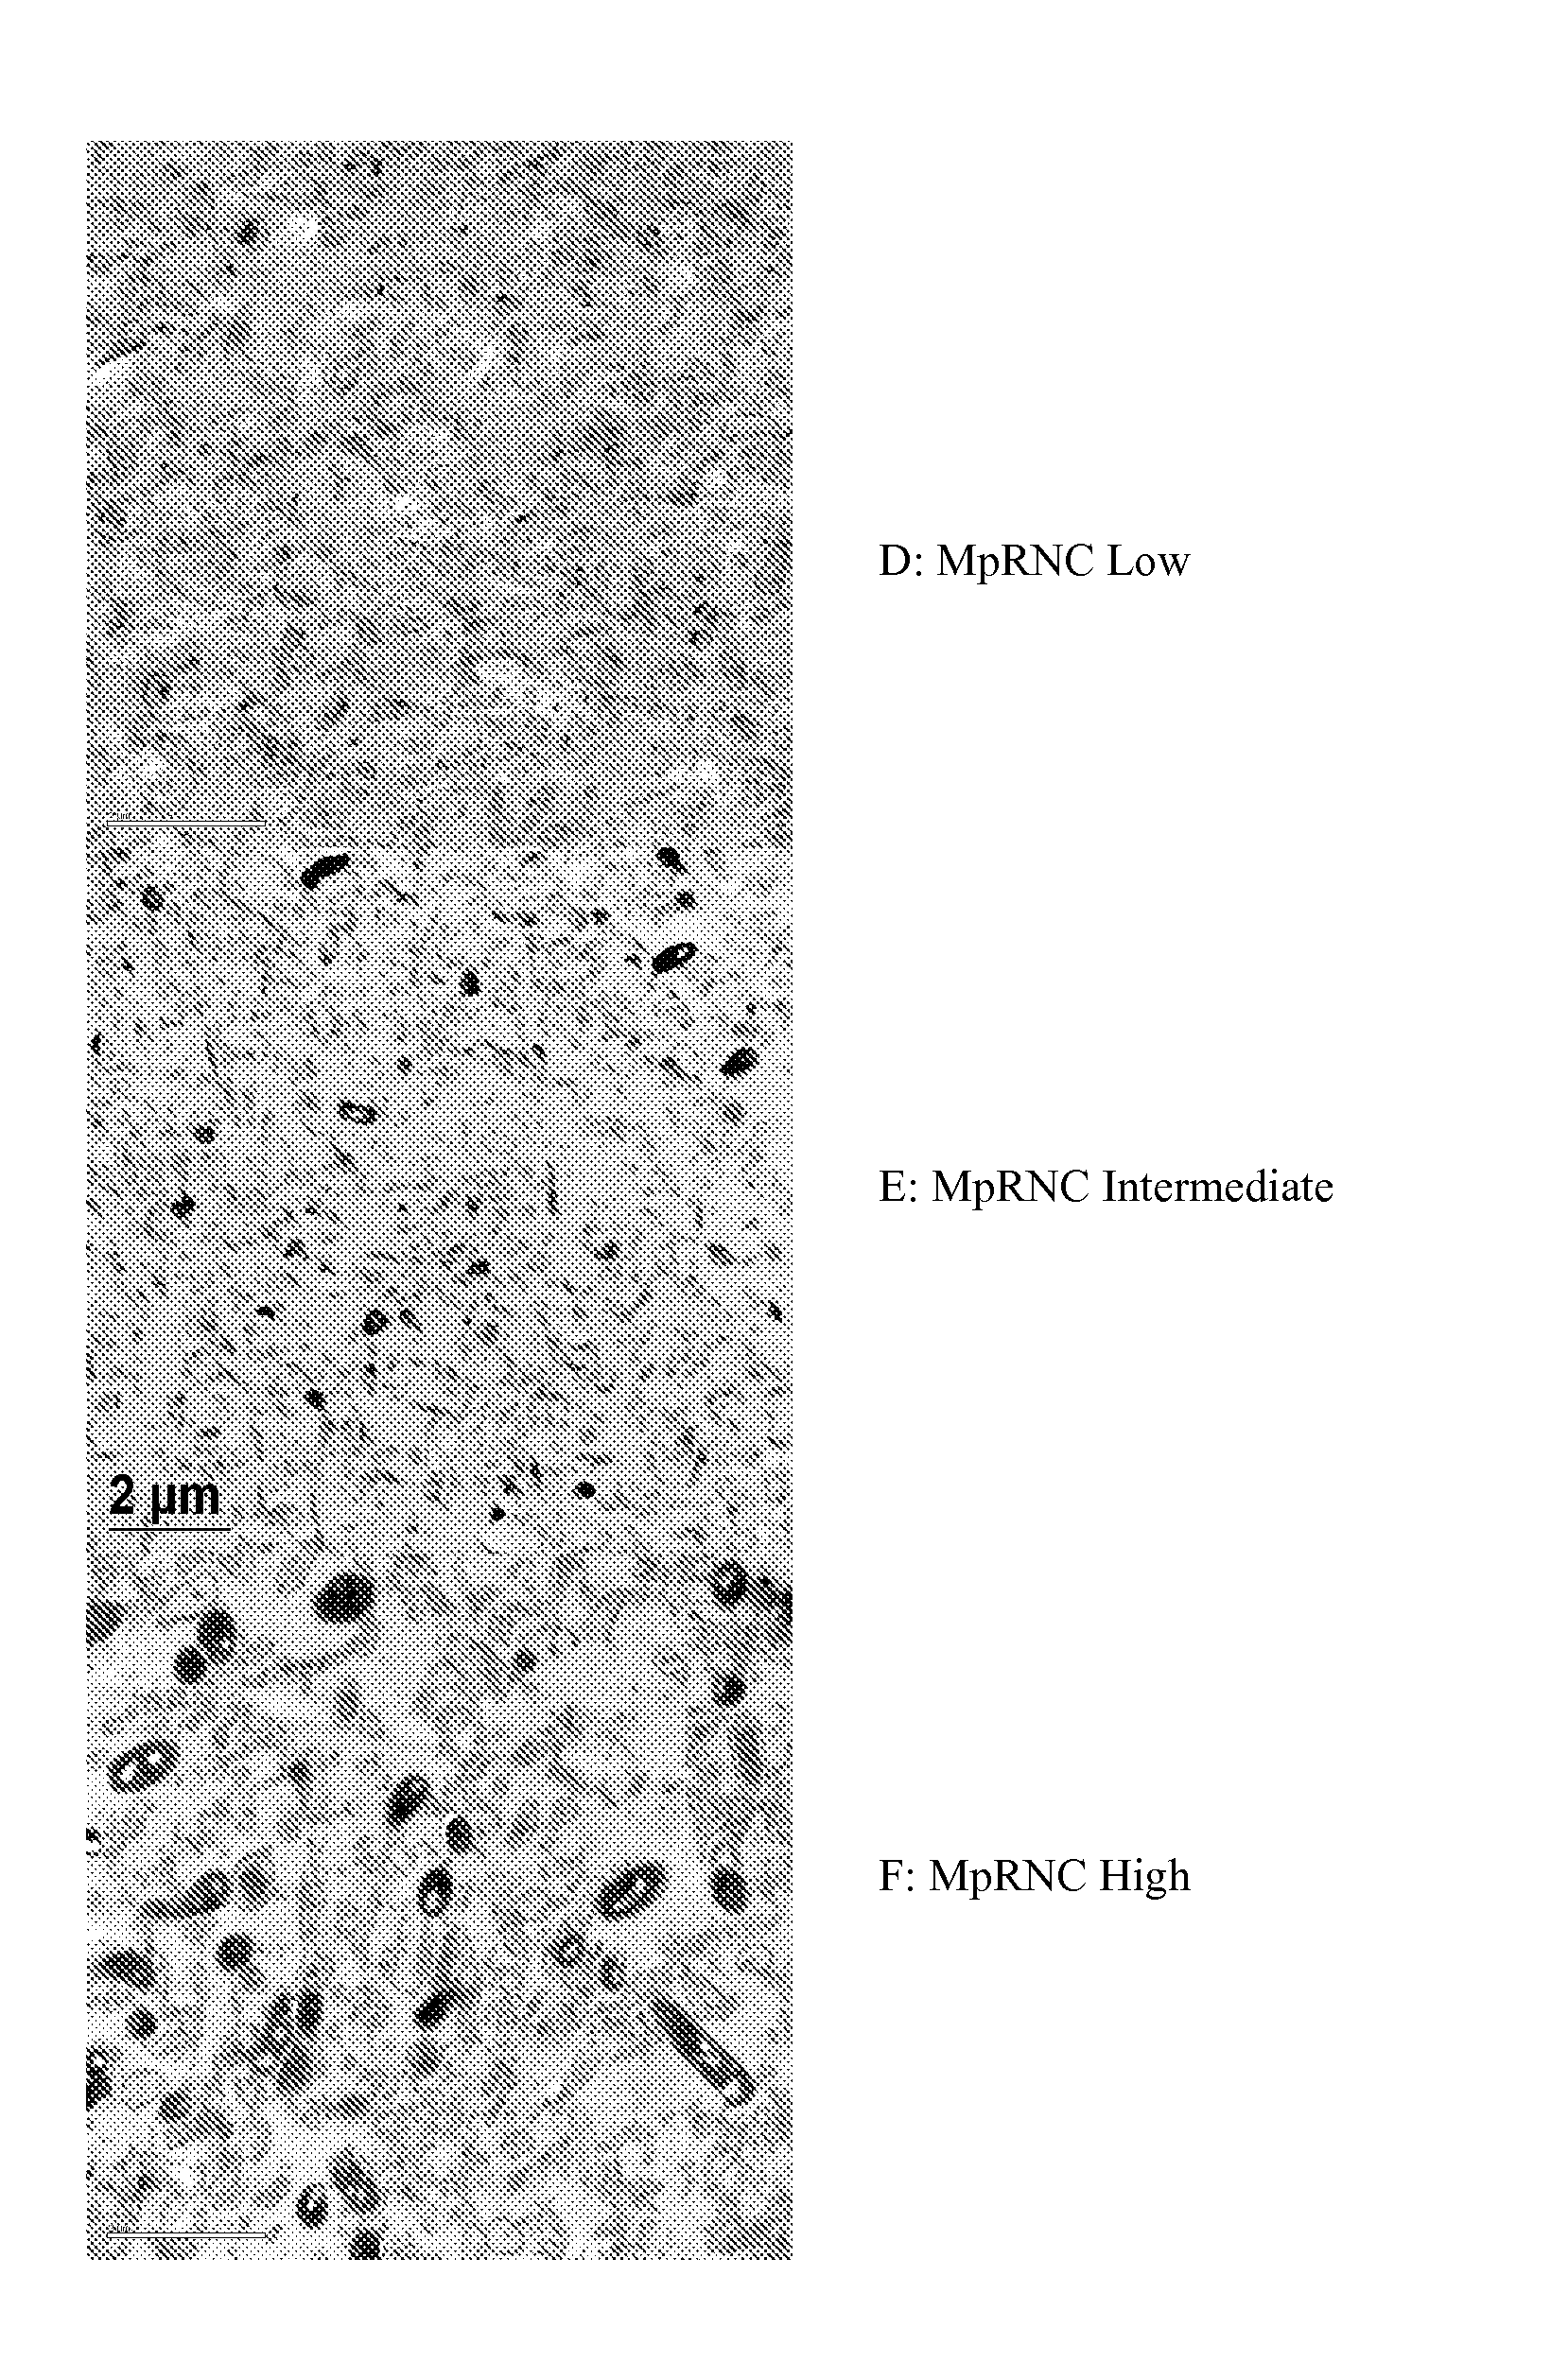 Bacterial ribonucleic acid cell wall compositions and methods of making and using them